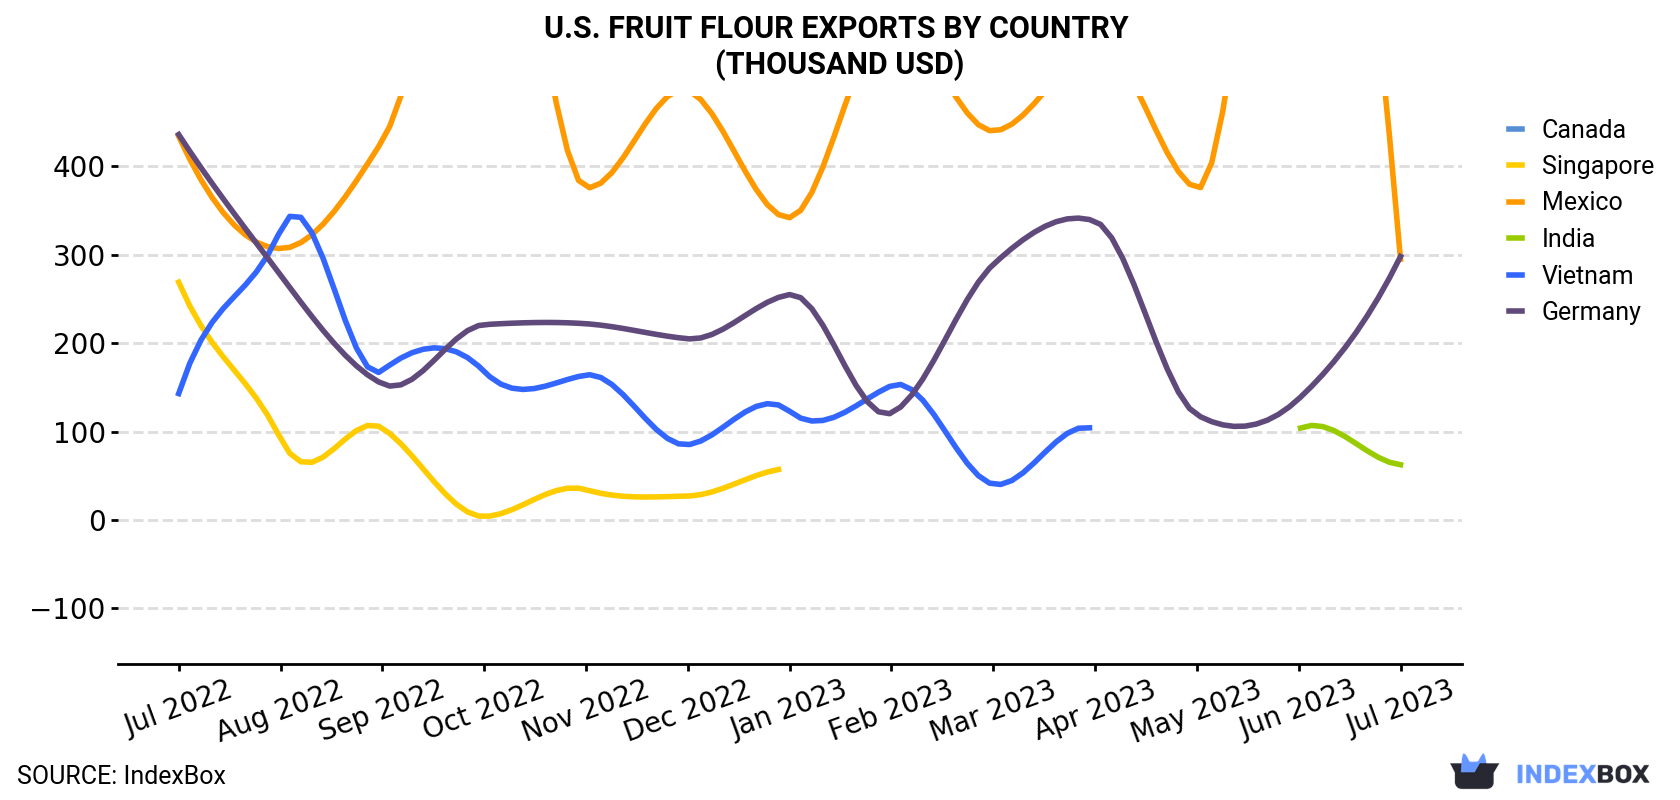 U.S. Fruit Flour Exports By Country (Thousand USD)